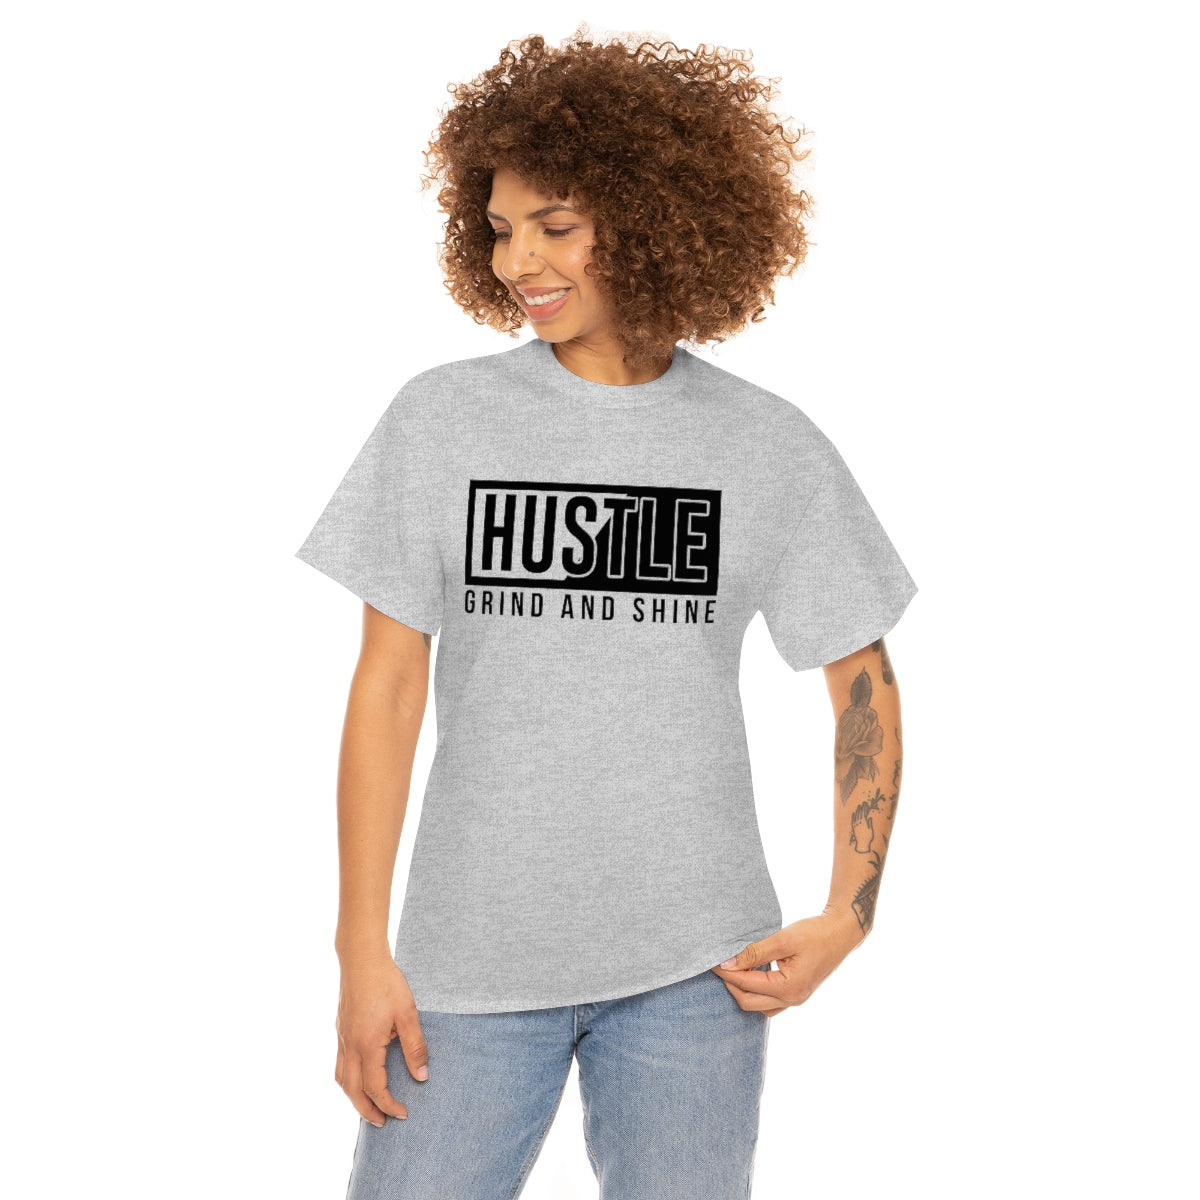 Hussle, Grind and Shine Unisex Heavy Cotton Tee